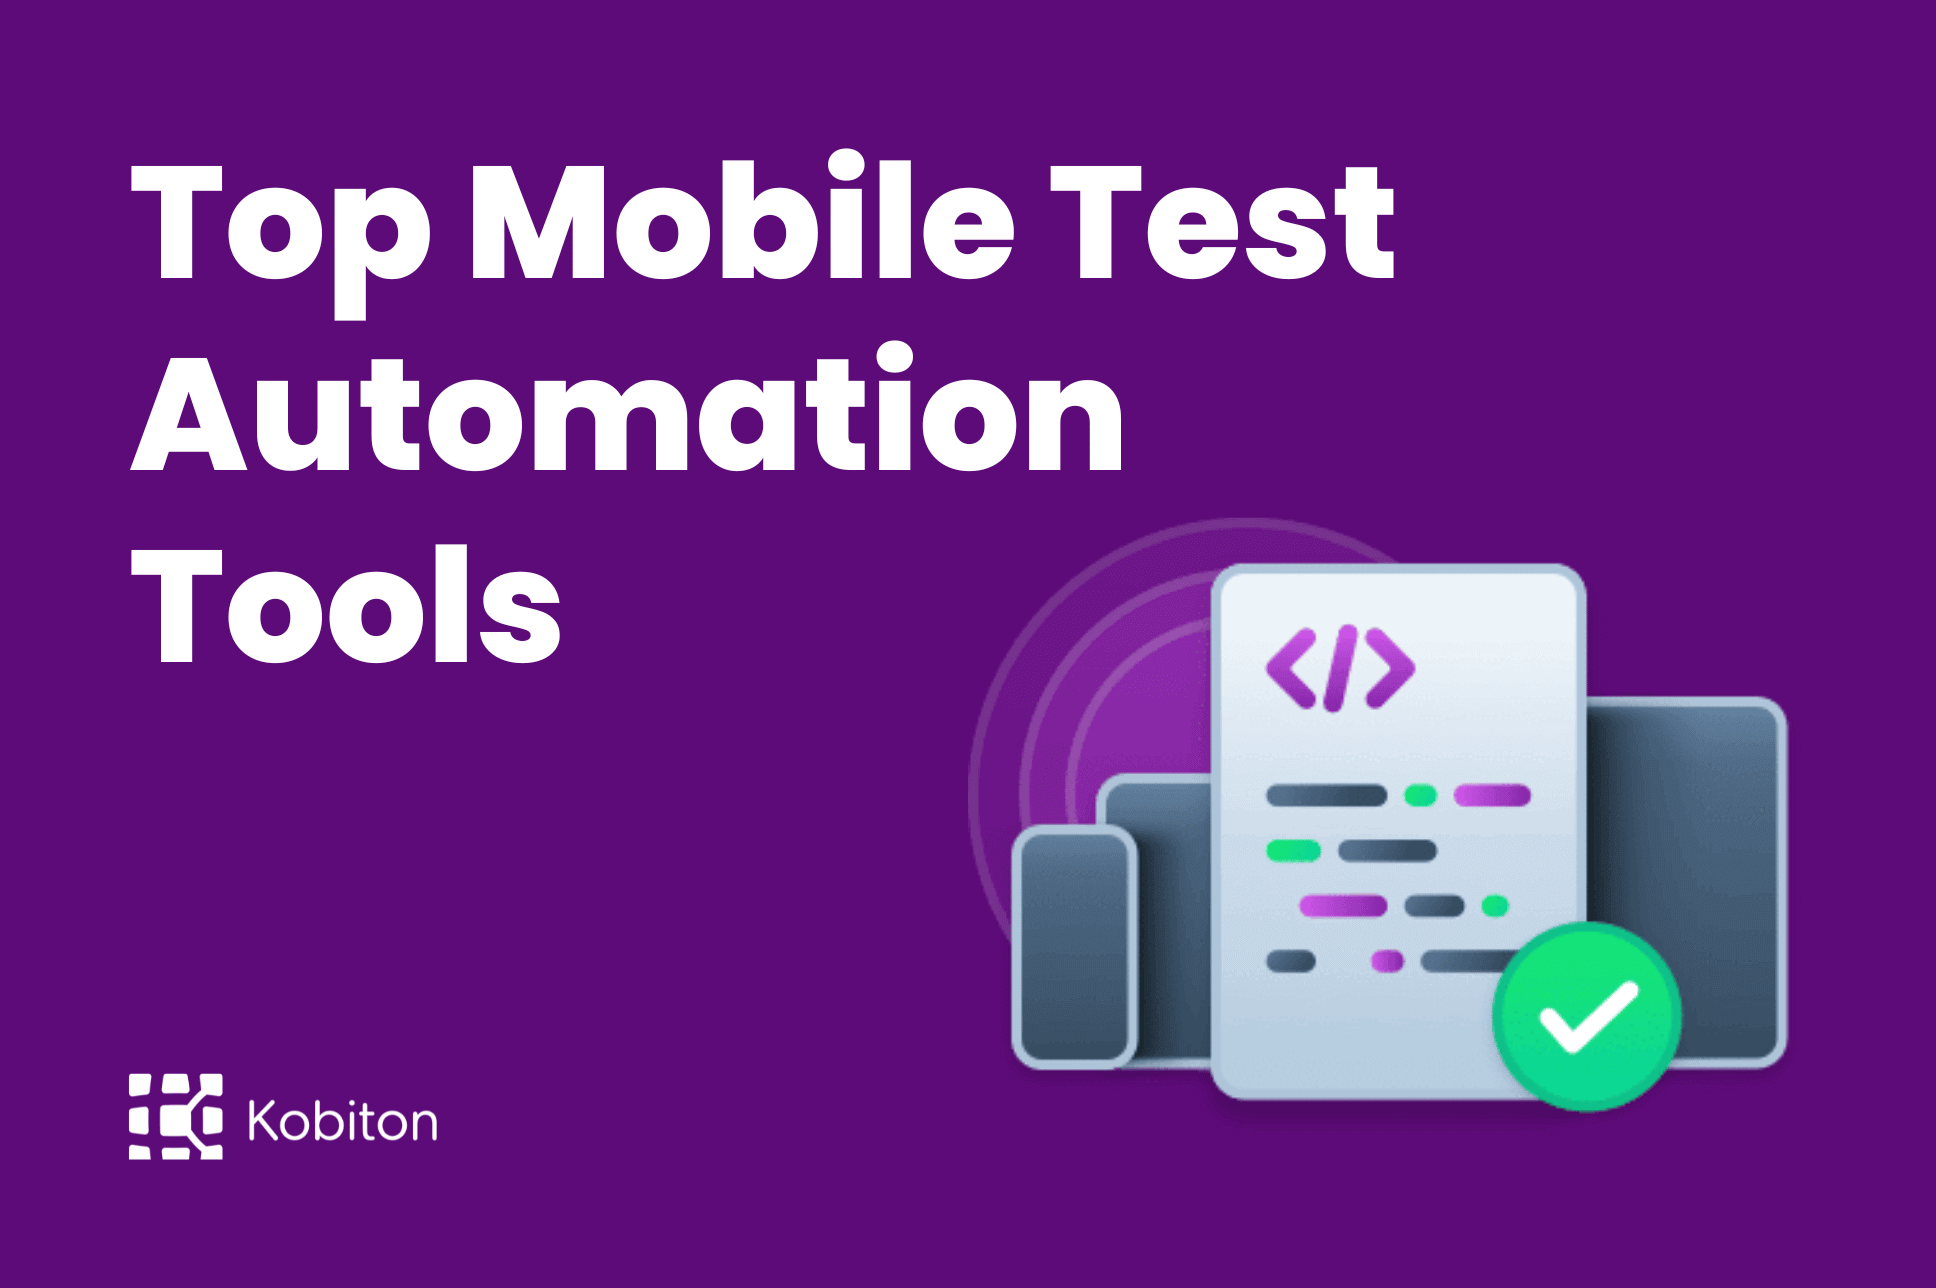 Top mobile test automation tools